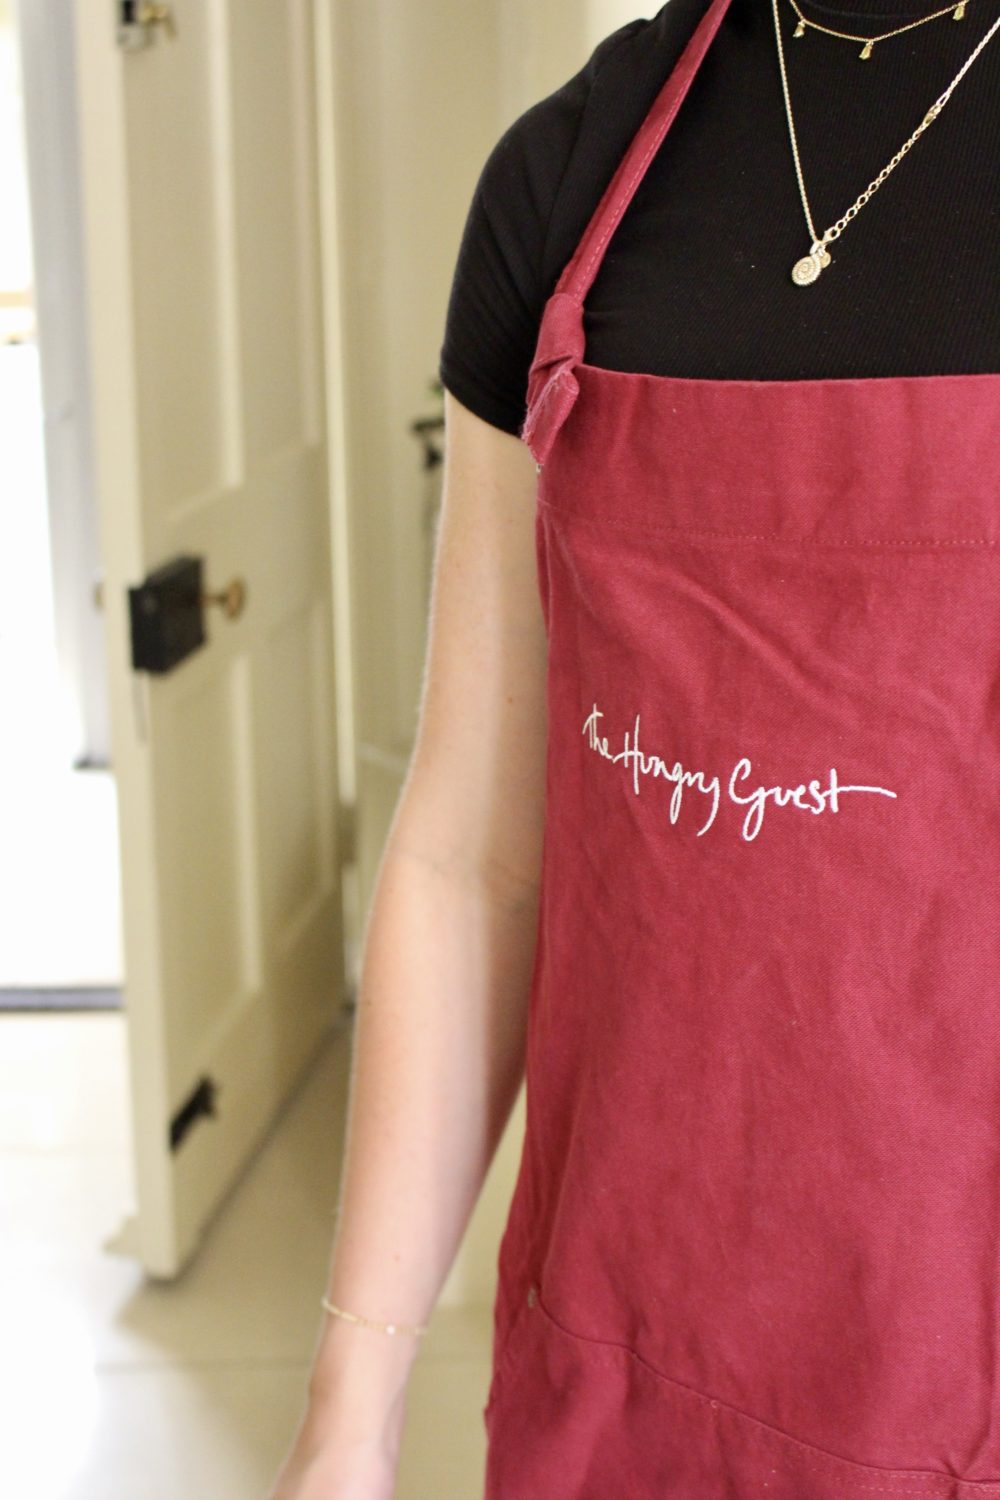 Image of the hungry guest apron on a person